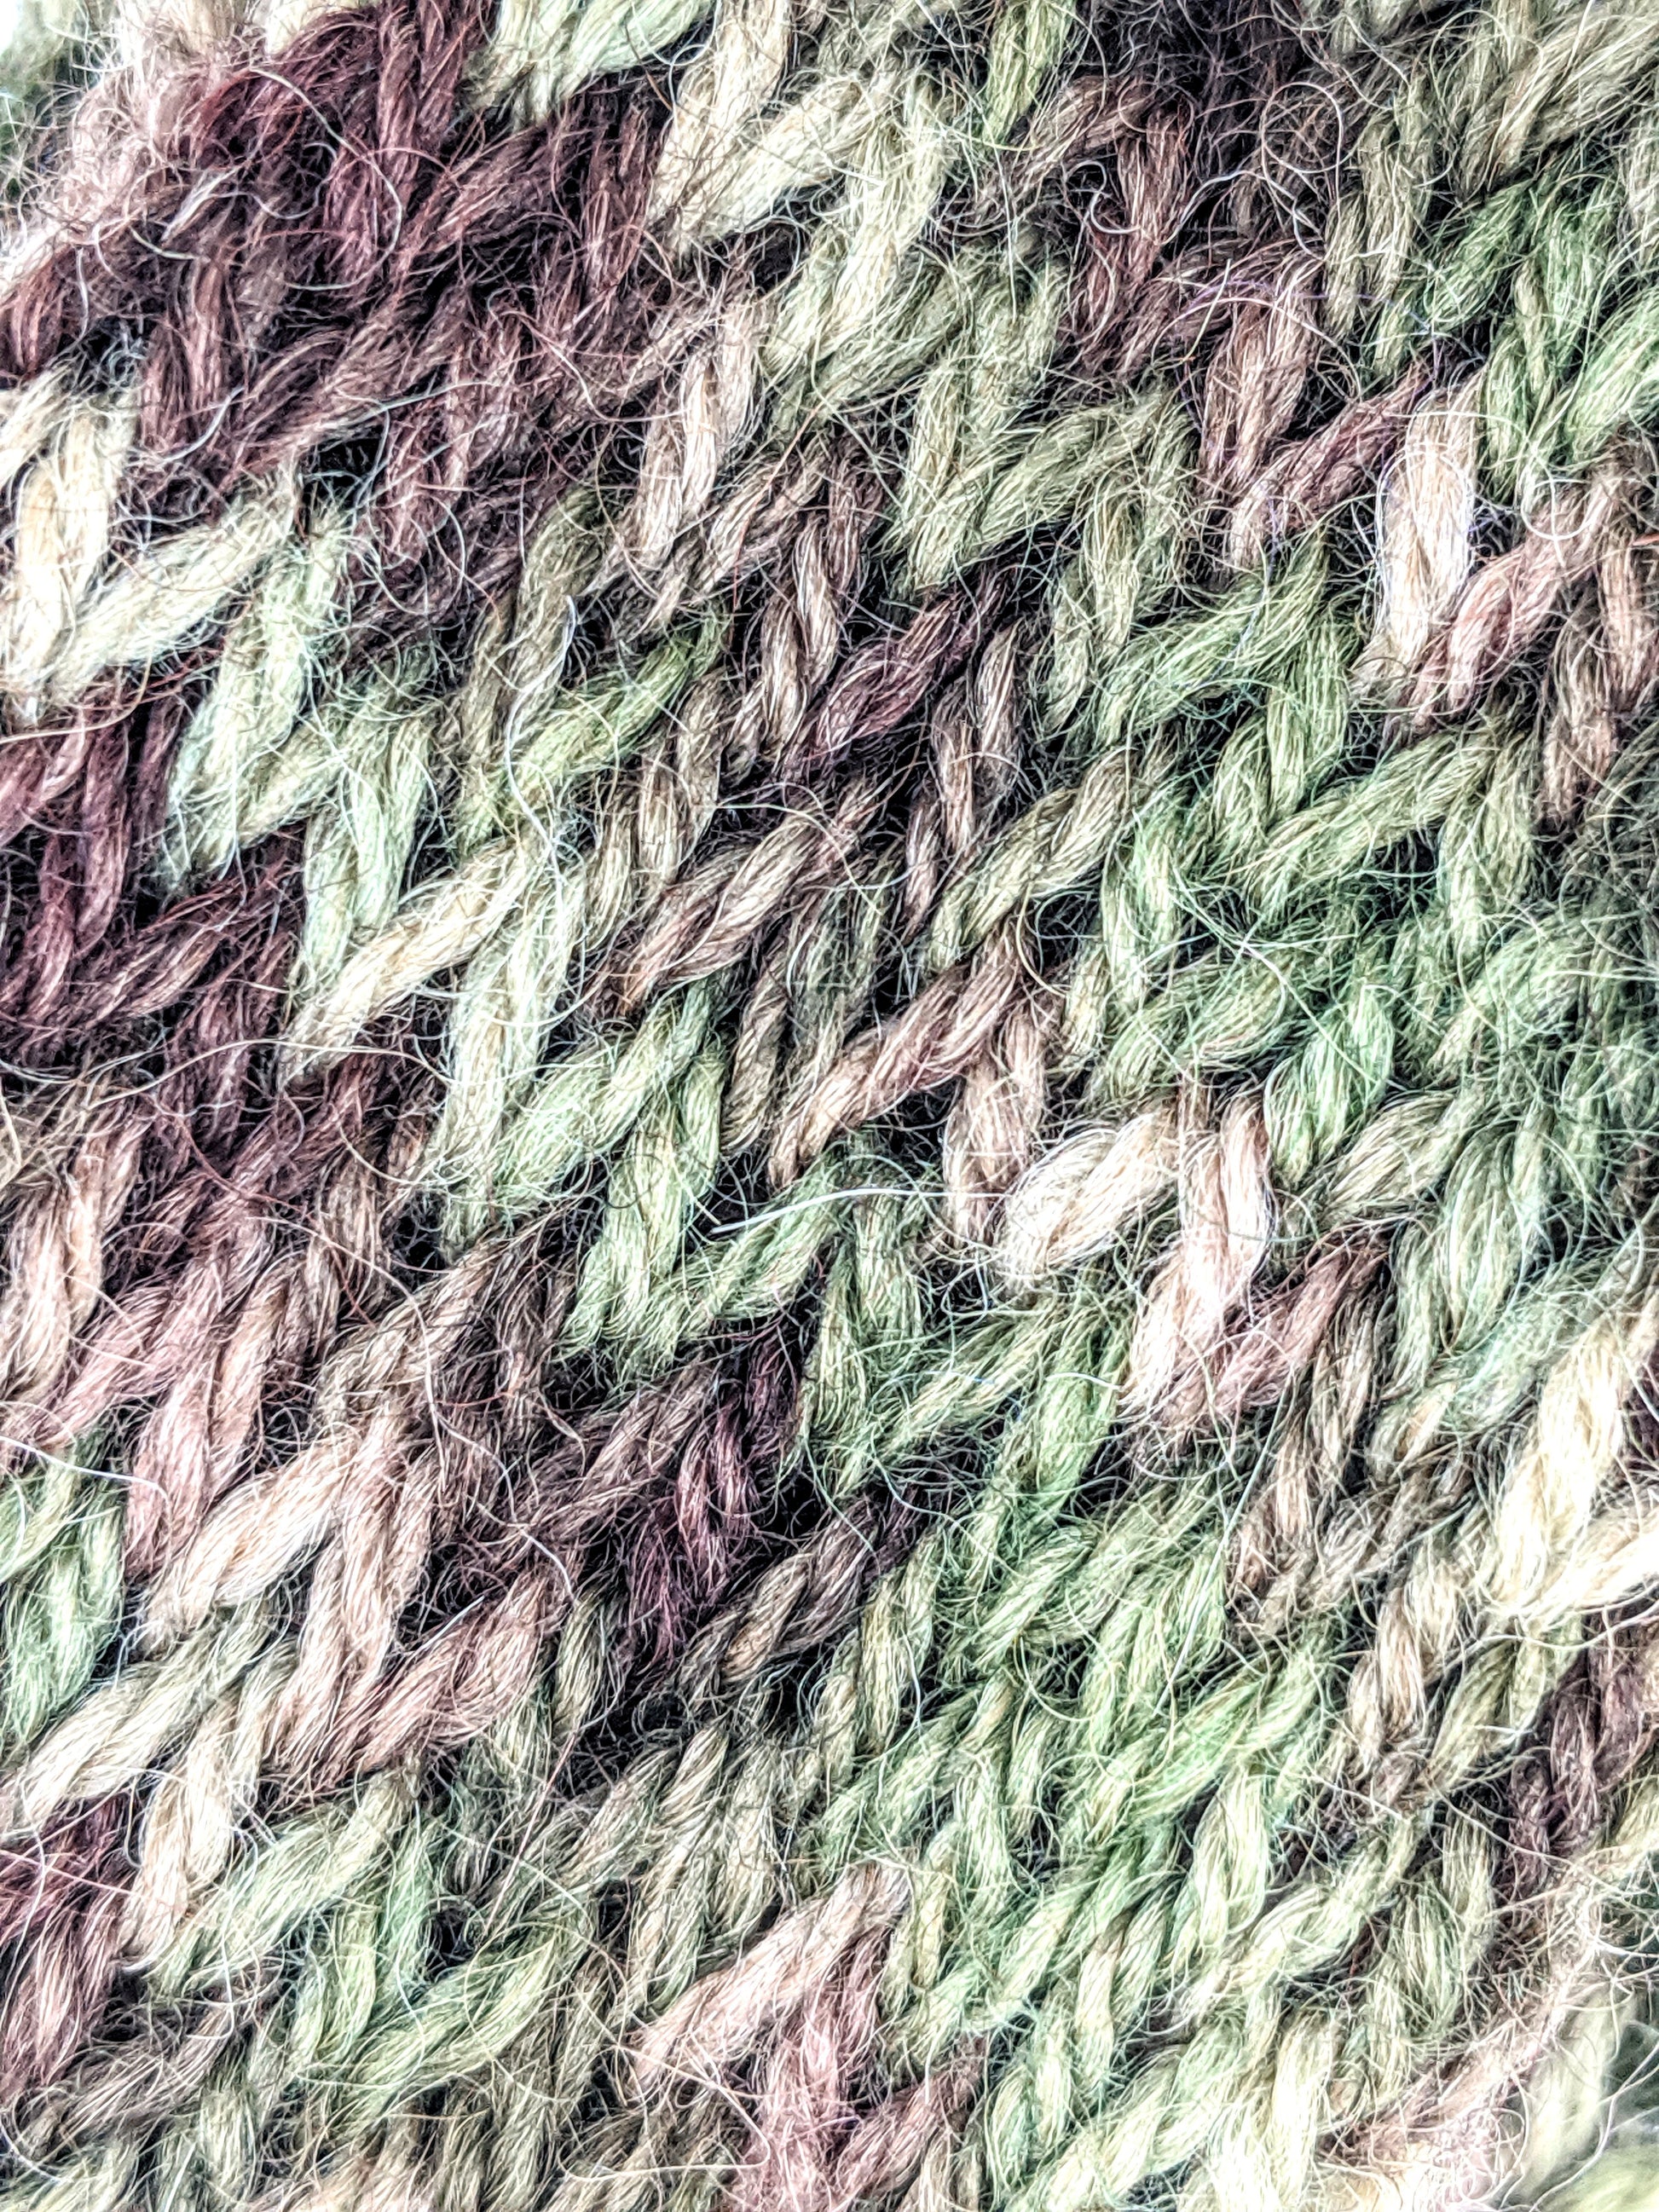 DK Knitter's Yarn green and brown